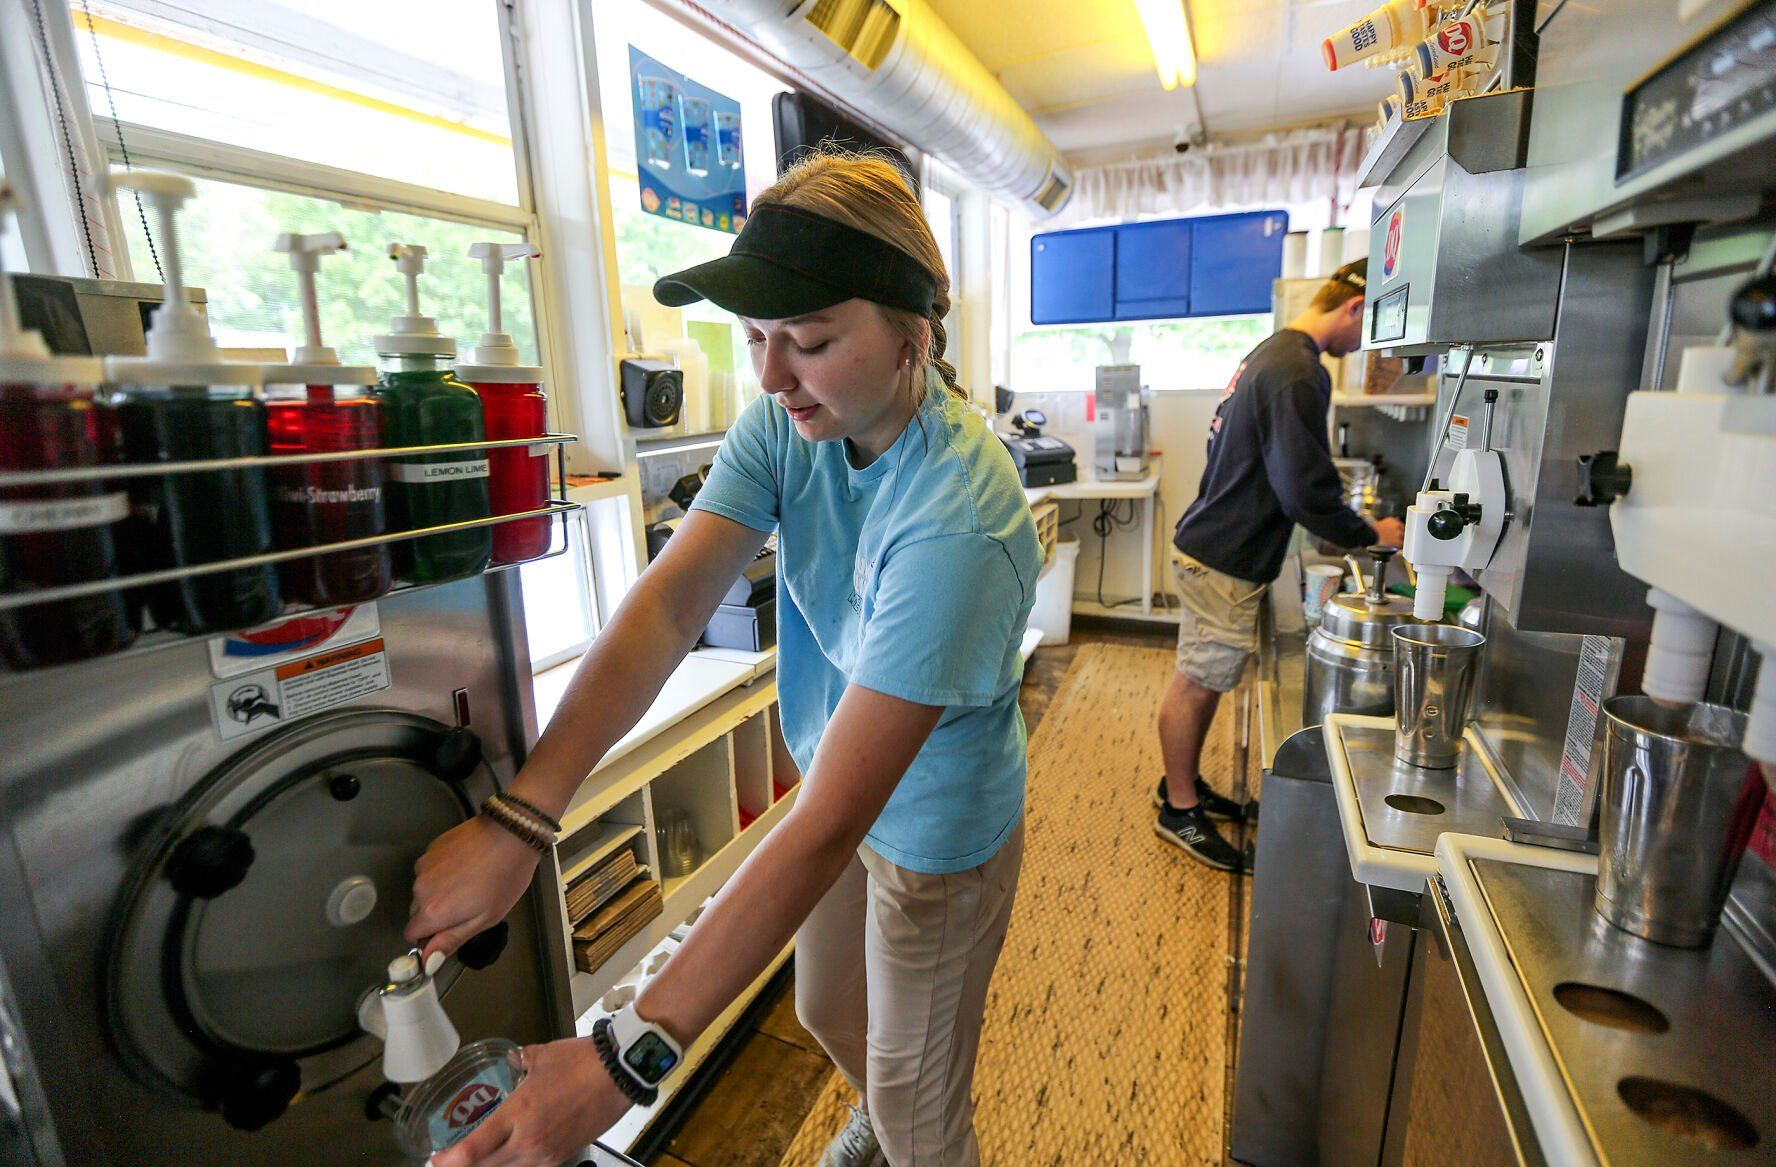 Jaquelyn Hochrein (left) and Johnny Blake serve up treats at the Rhomberg Avenue Dairy Queen in Dubuque.    PHOTO CREDIT: Dave Kettering